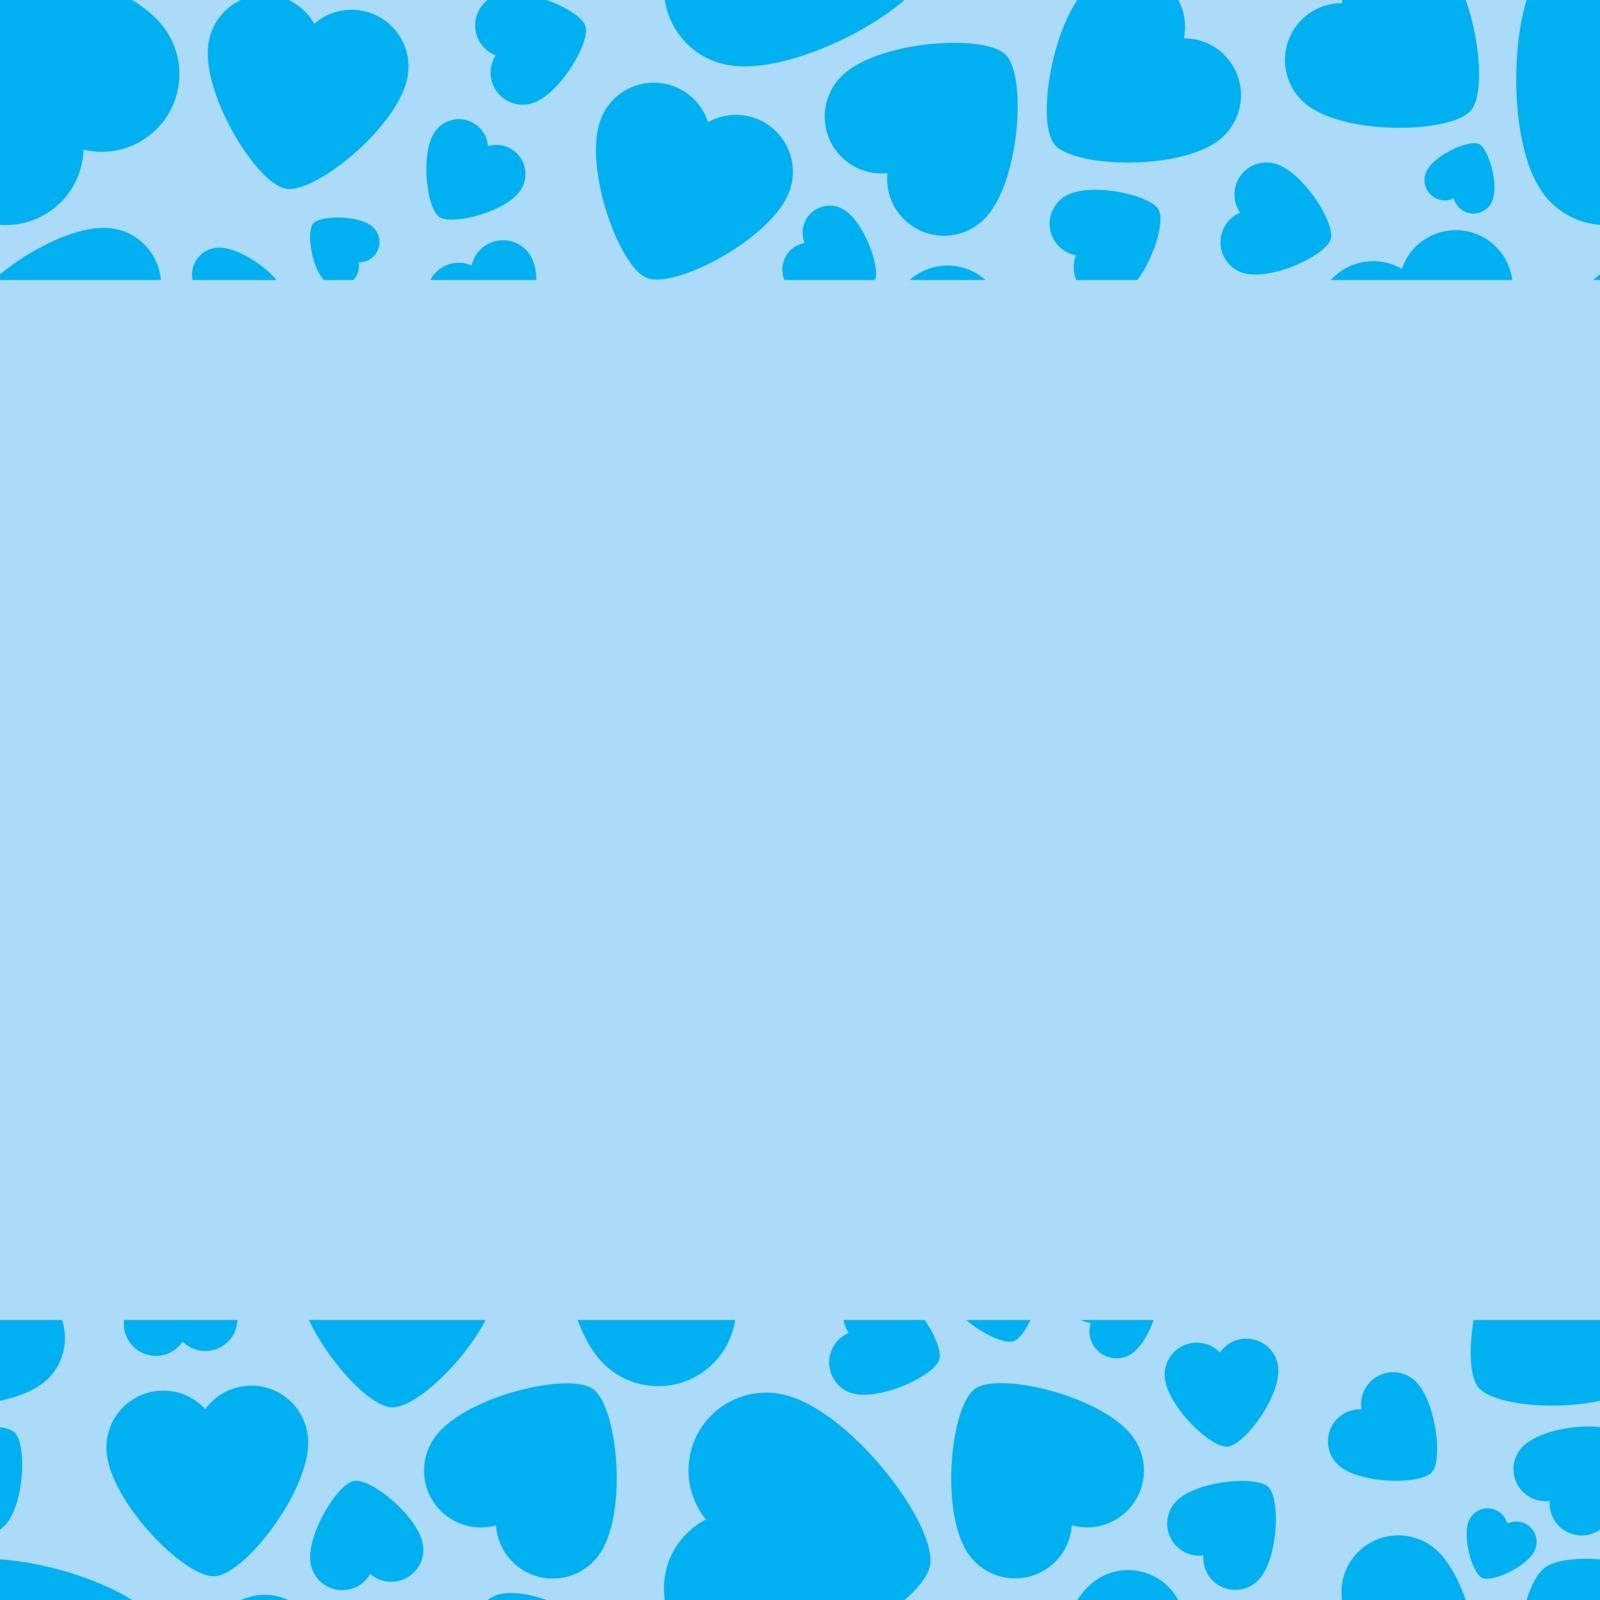 Frame With Blue Heart On Blue Background. Graphic Design In The Concept of Love. Love Symbol And Emblem for Valentines Day, Wedding, Birthday and Holiday. Vector Card and Template with Copy Space.